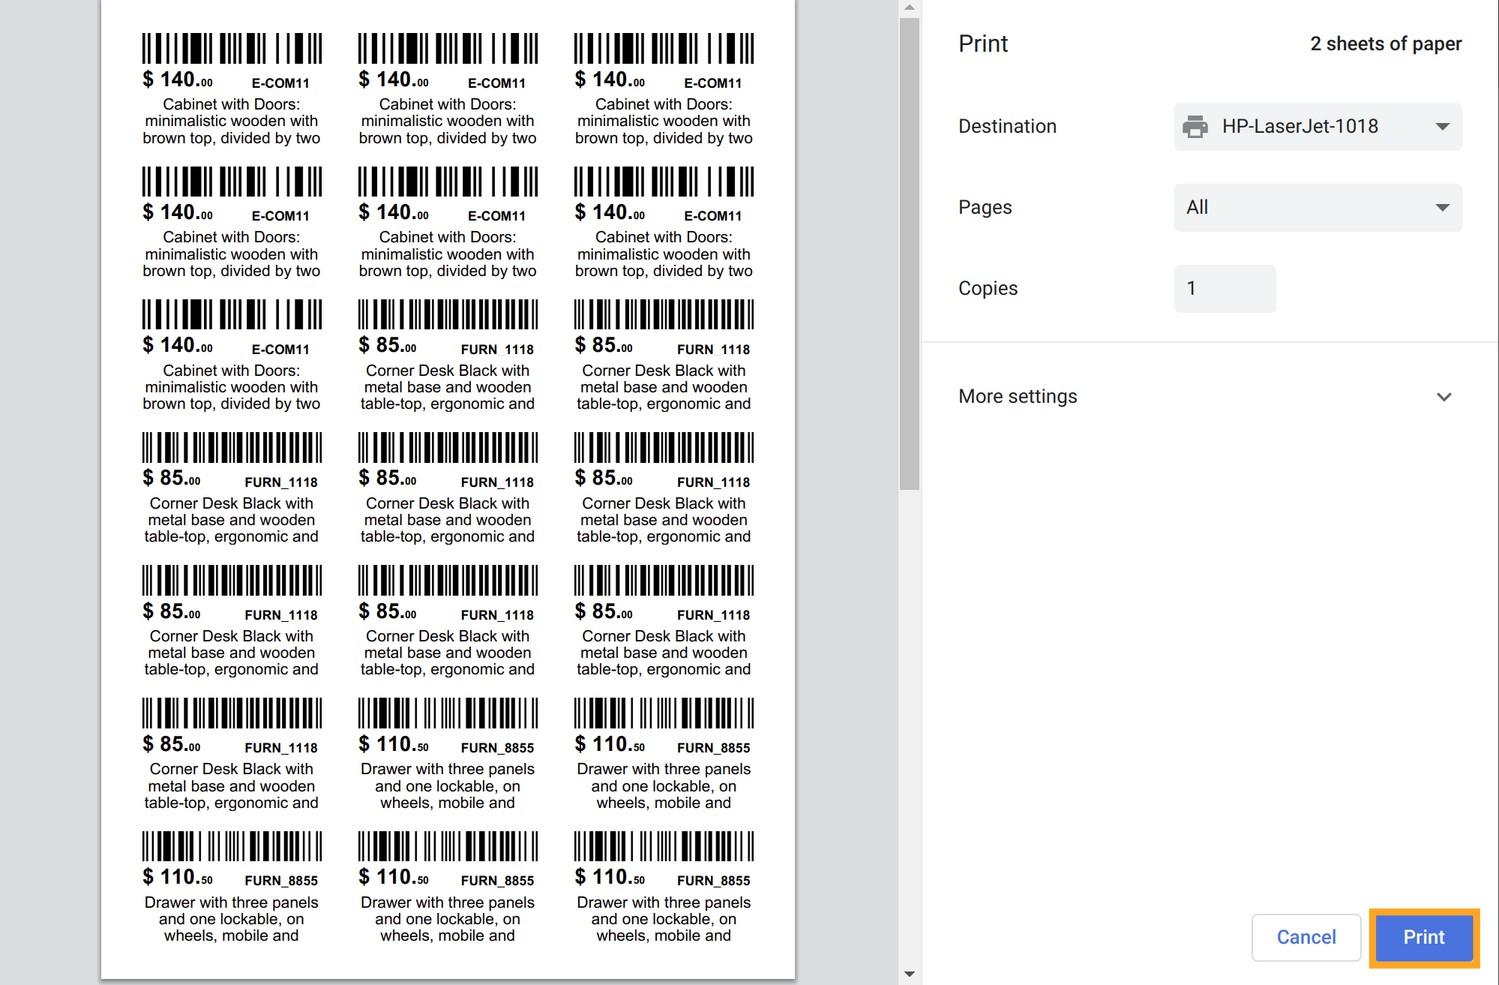 16.0 odoo label printing directly